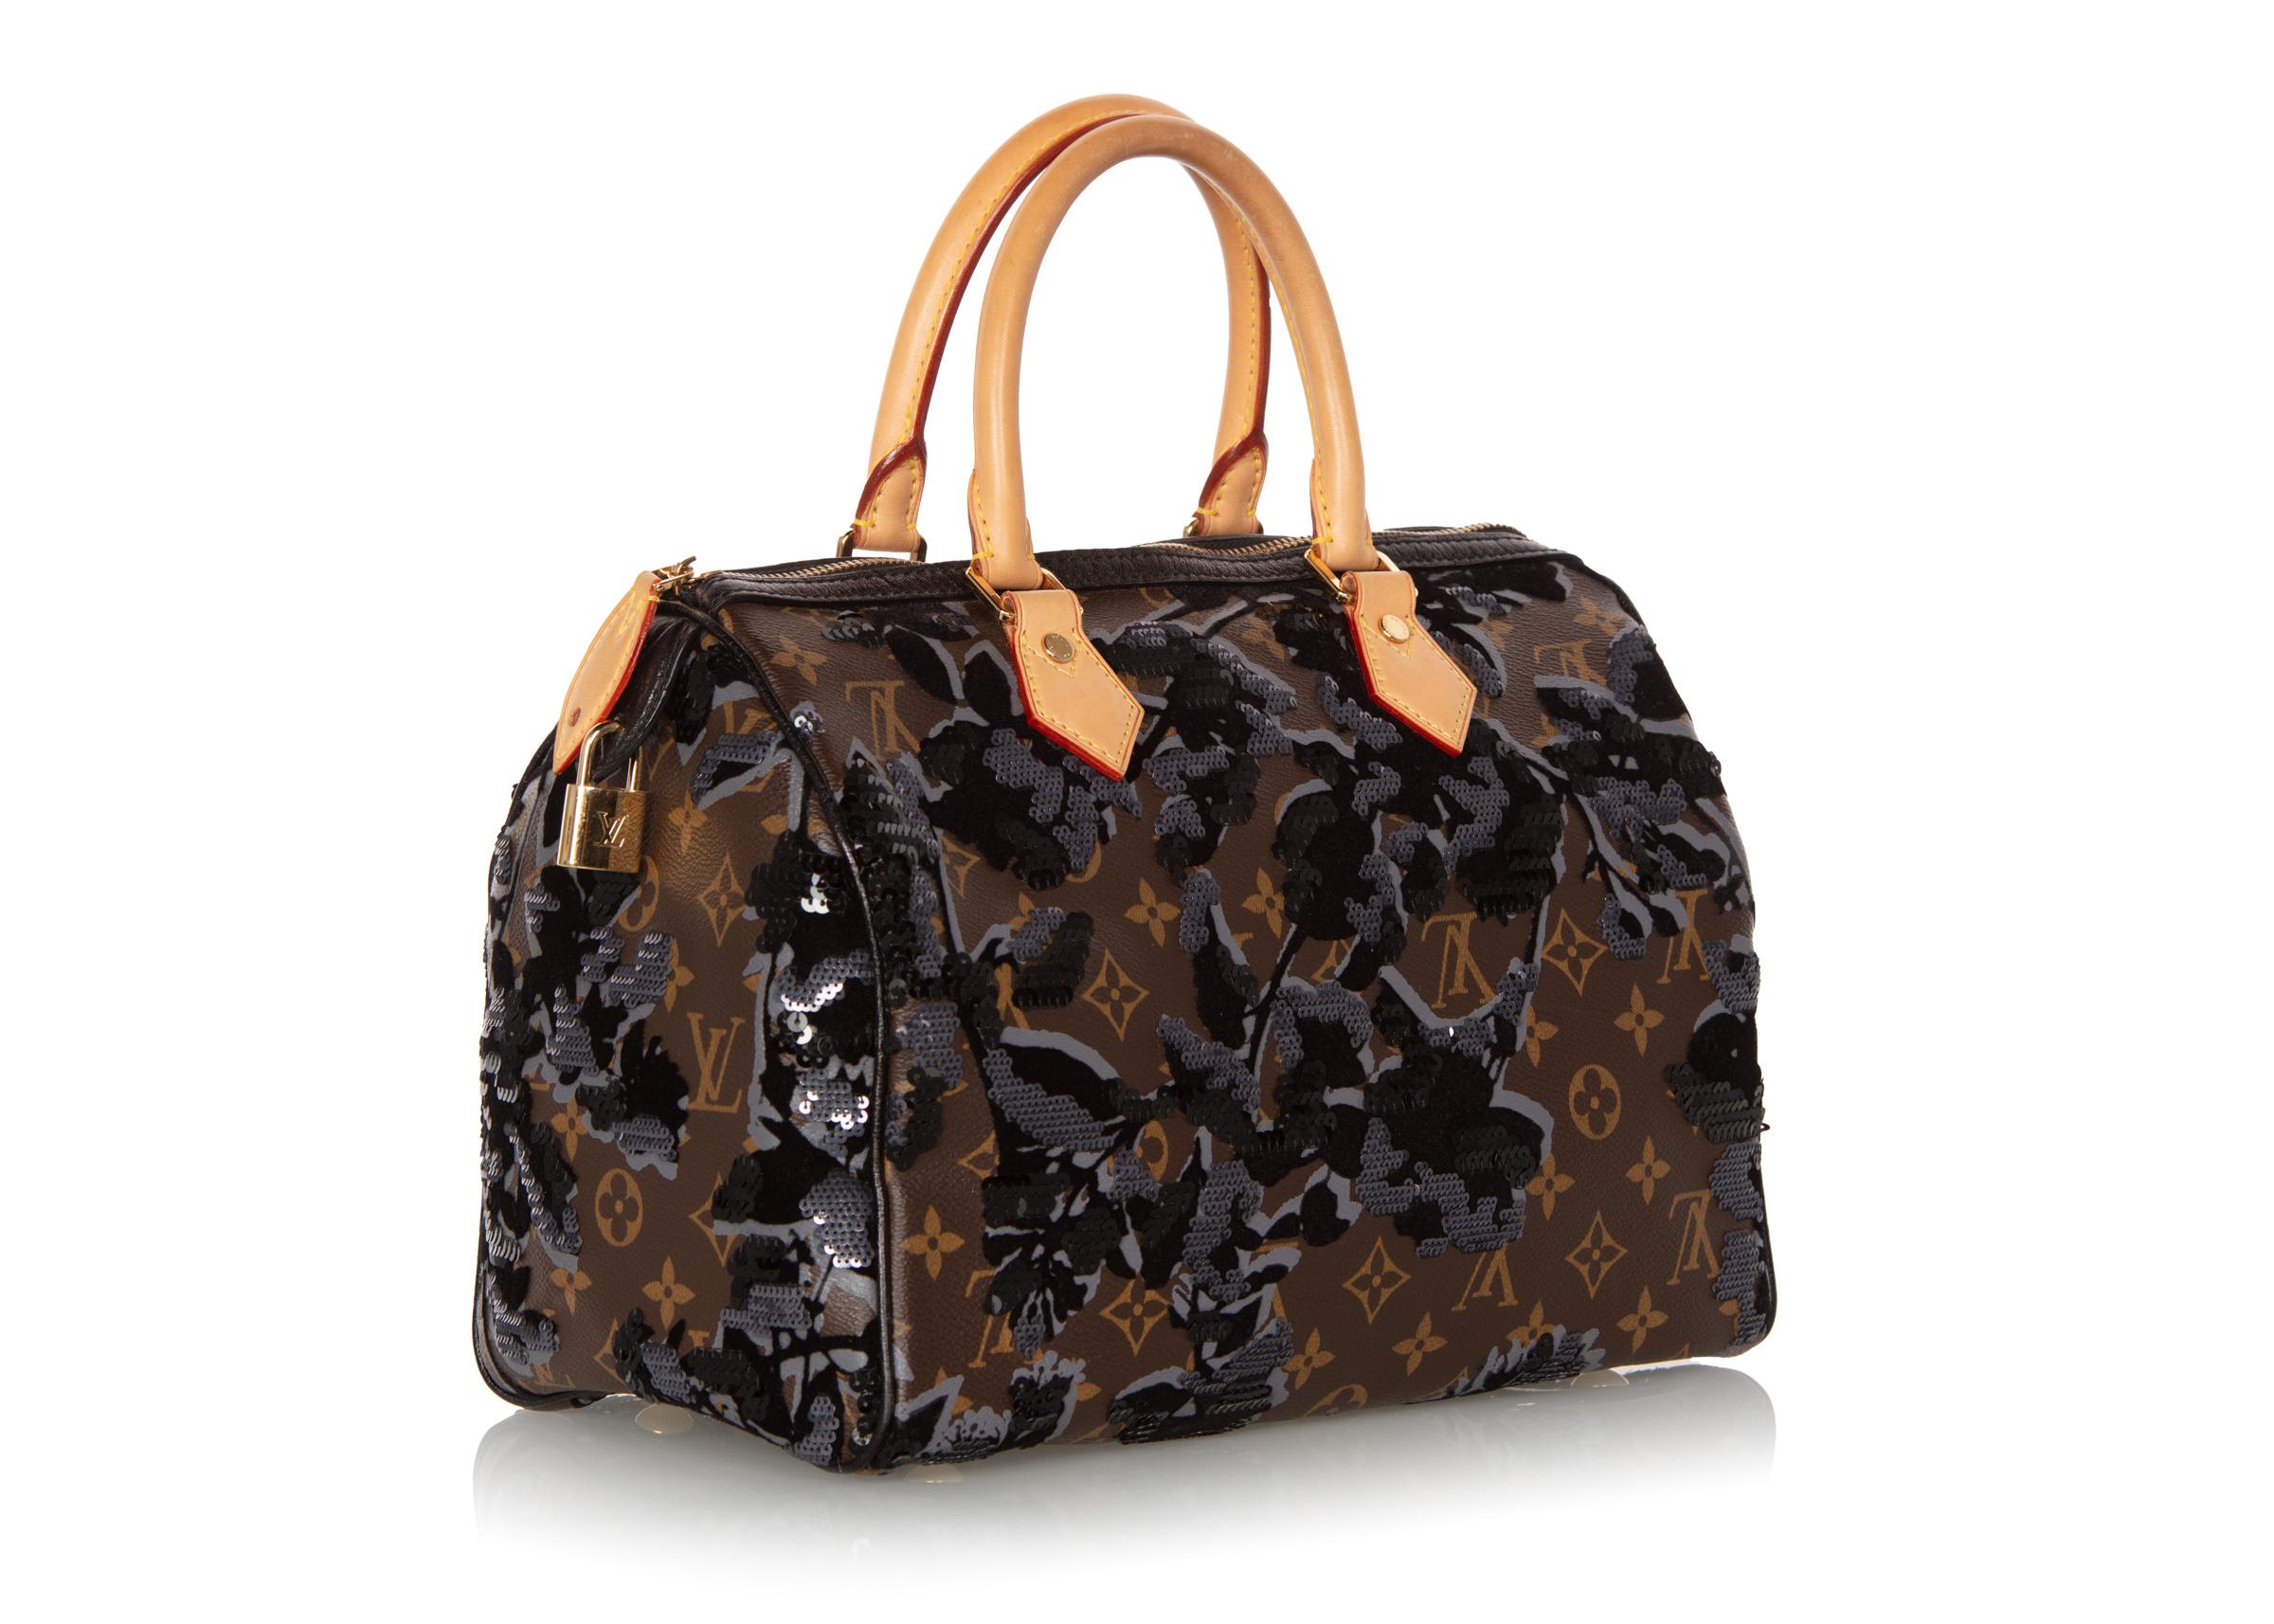 In the world of fashion Louis Vuitton has become synonymous with luxury, and high-end leather goods. Now a massive international fashion machine, the notoriety and timeless luxe of the chocolate brown Louis Vuitton handbag remains. A limited-edition